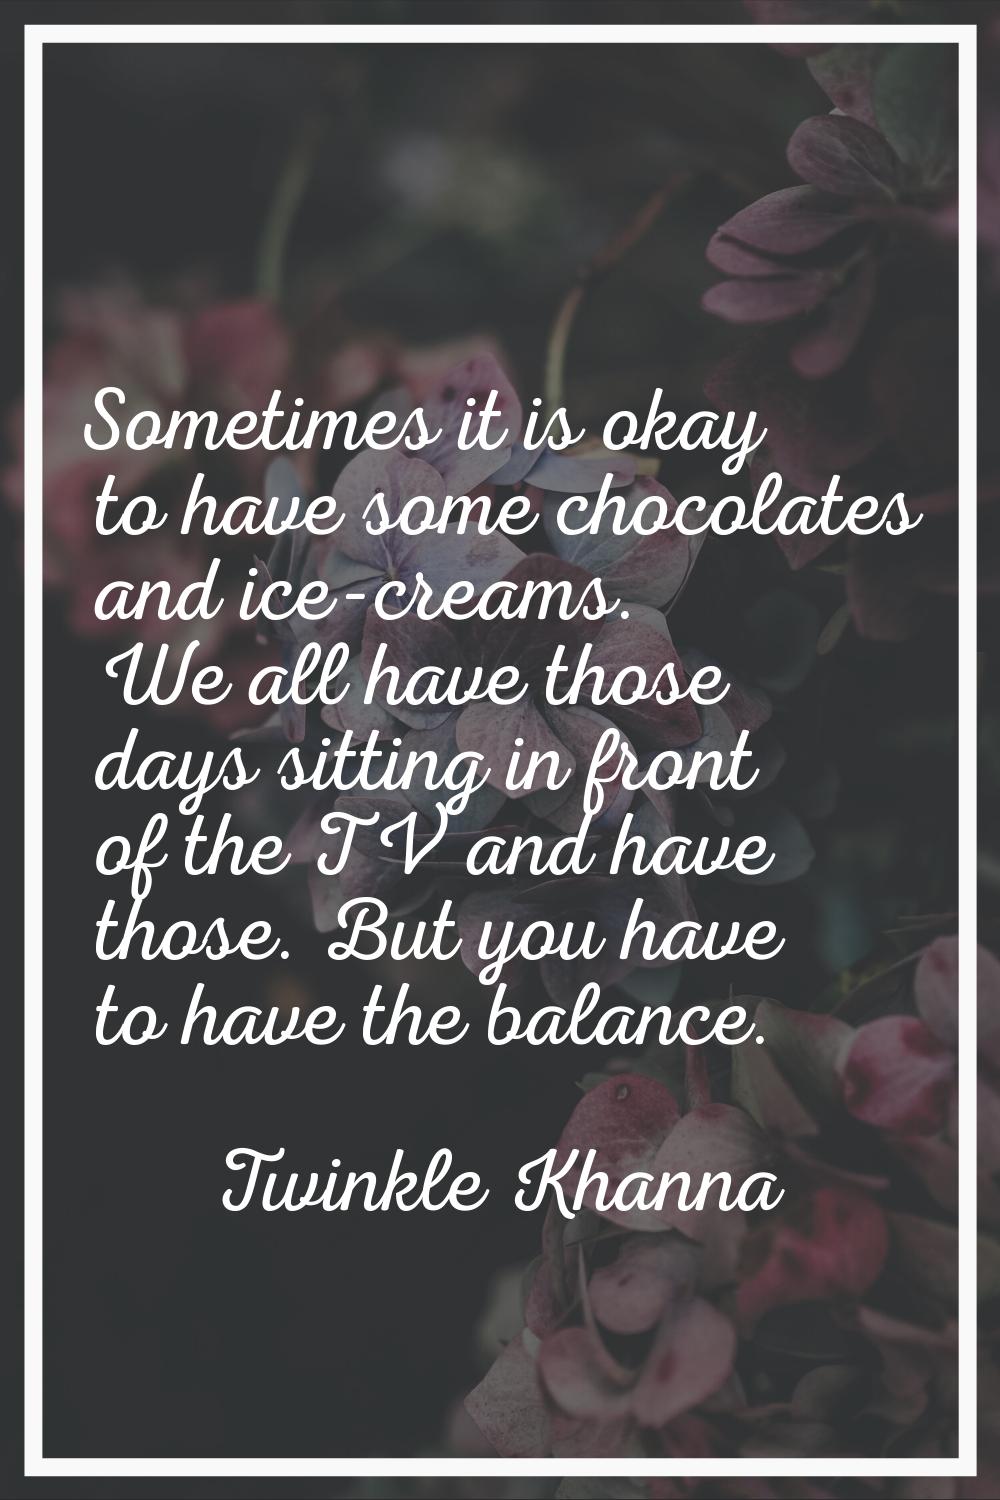 Sometimes it is okay to have some chocolates and ice-creams. We all have those days sitting in fron